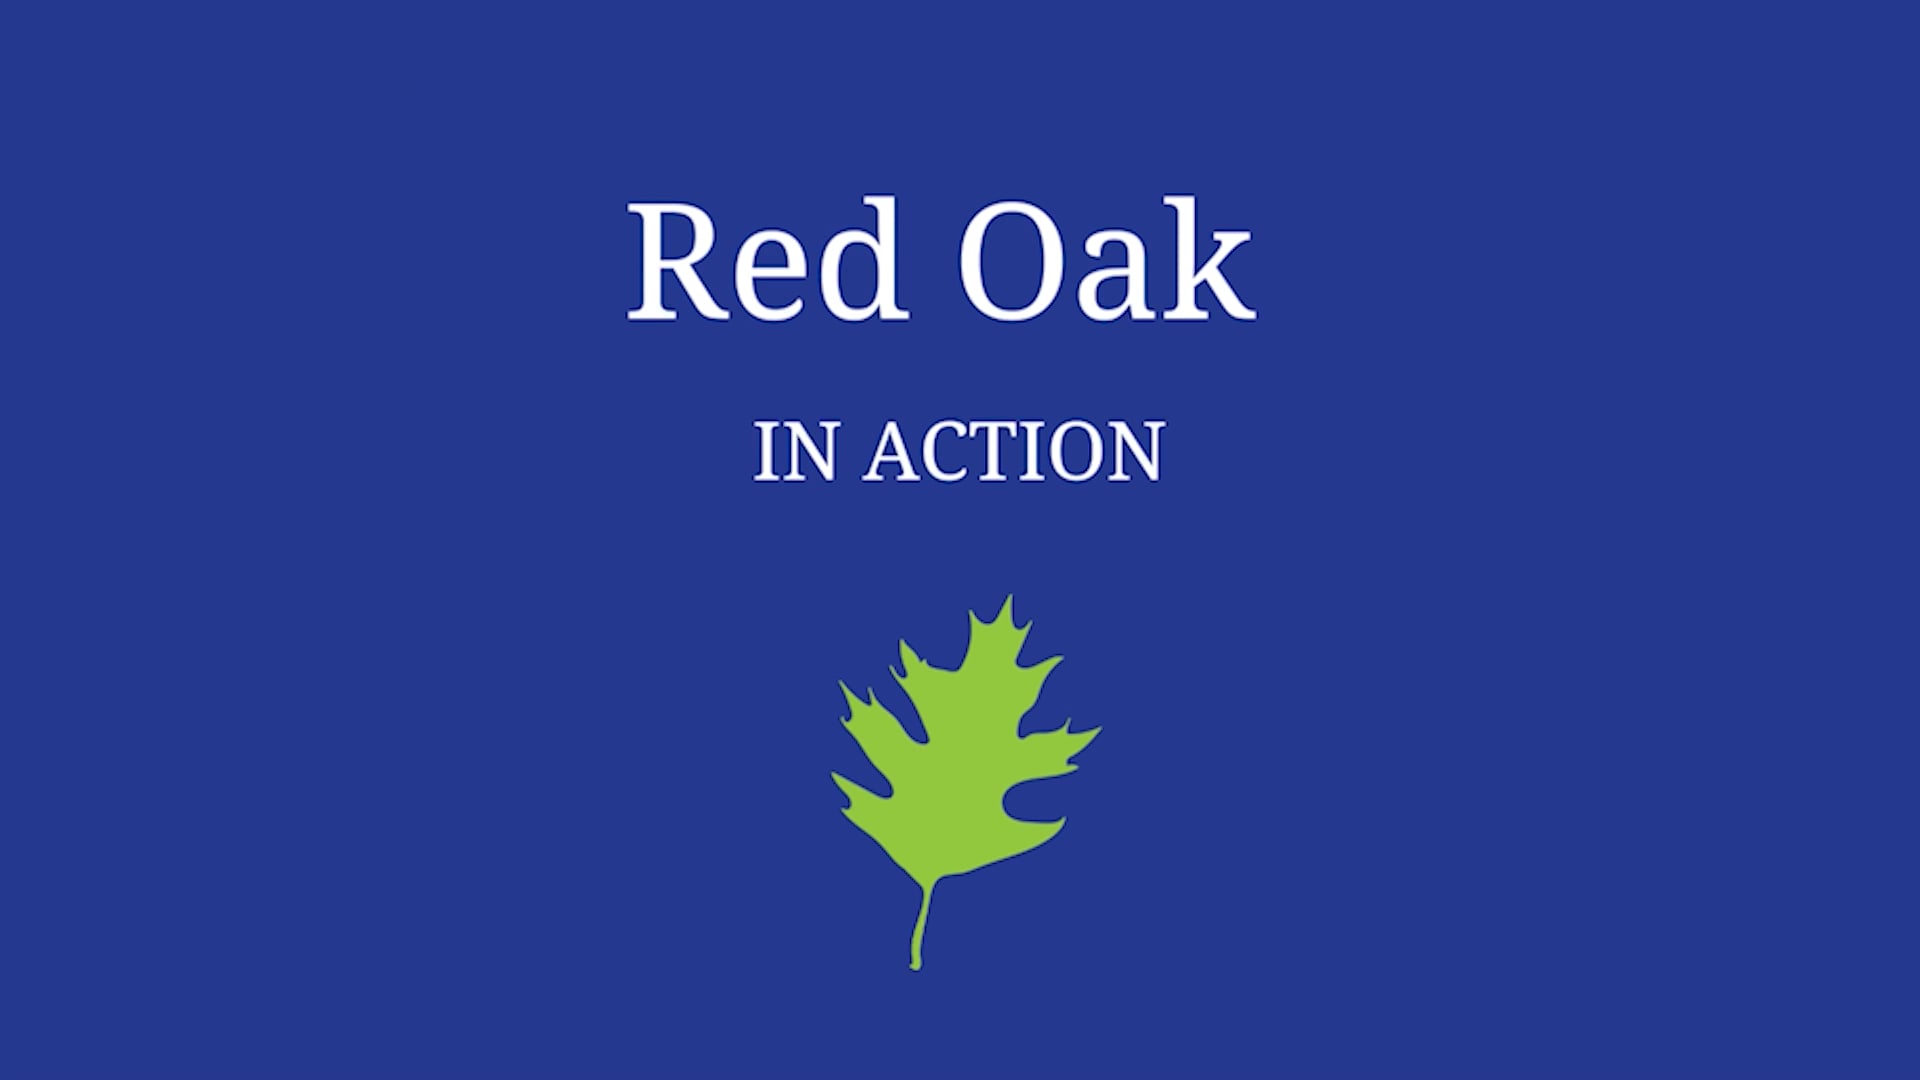 Red Oak in Action